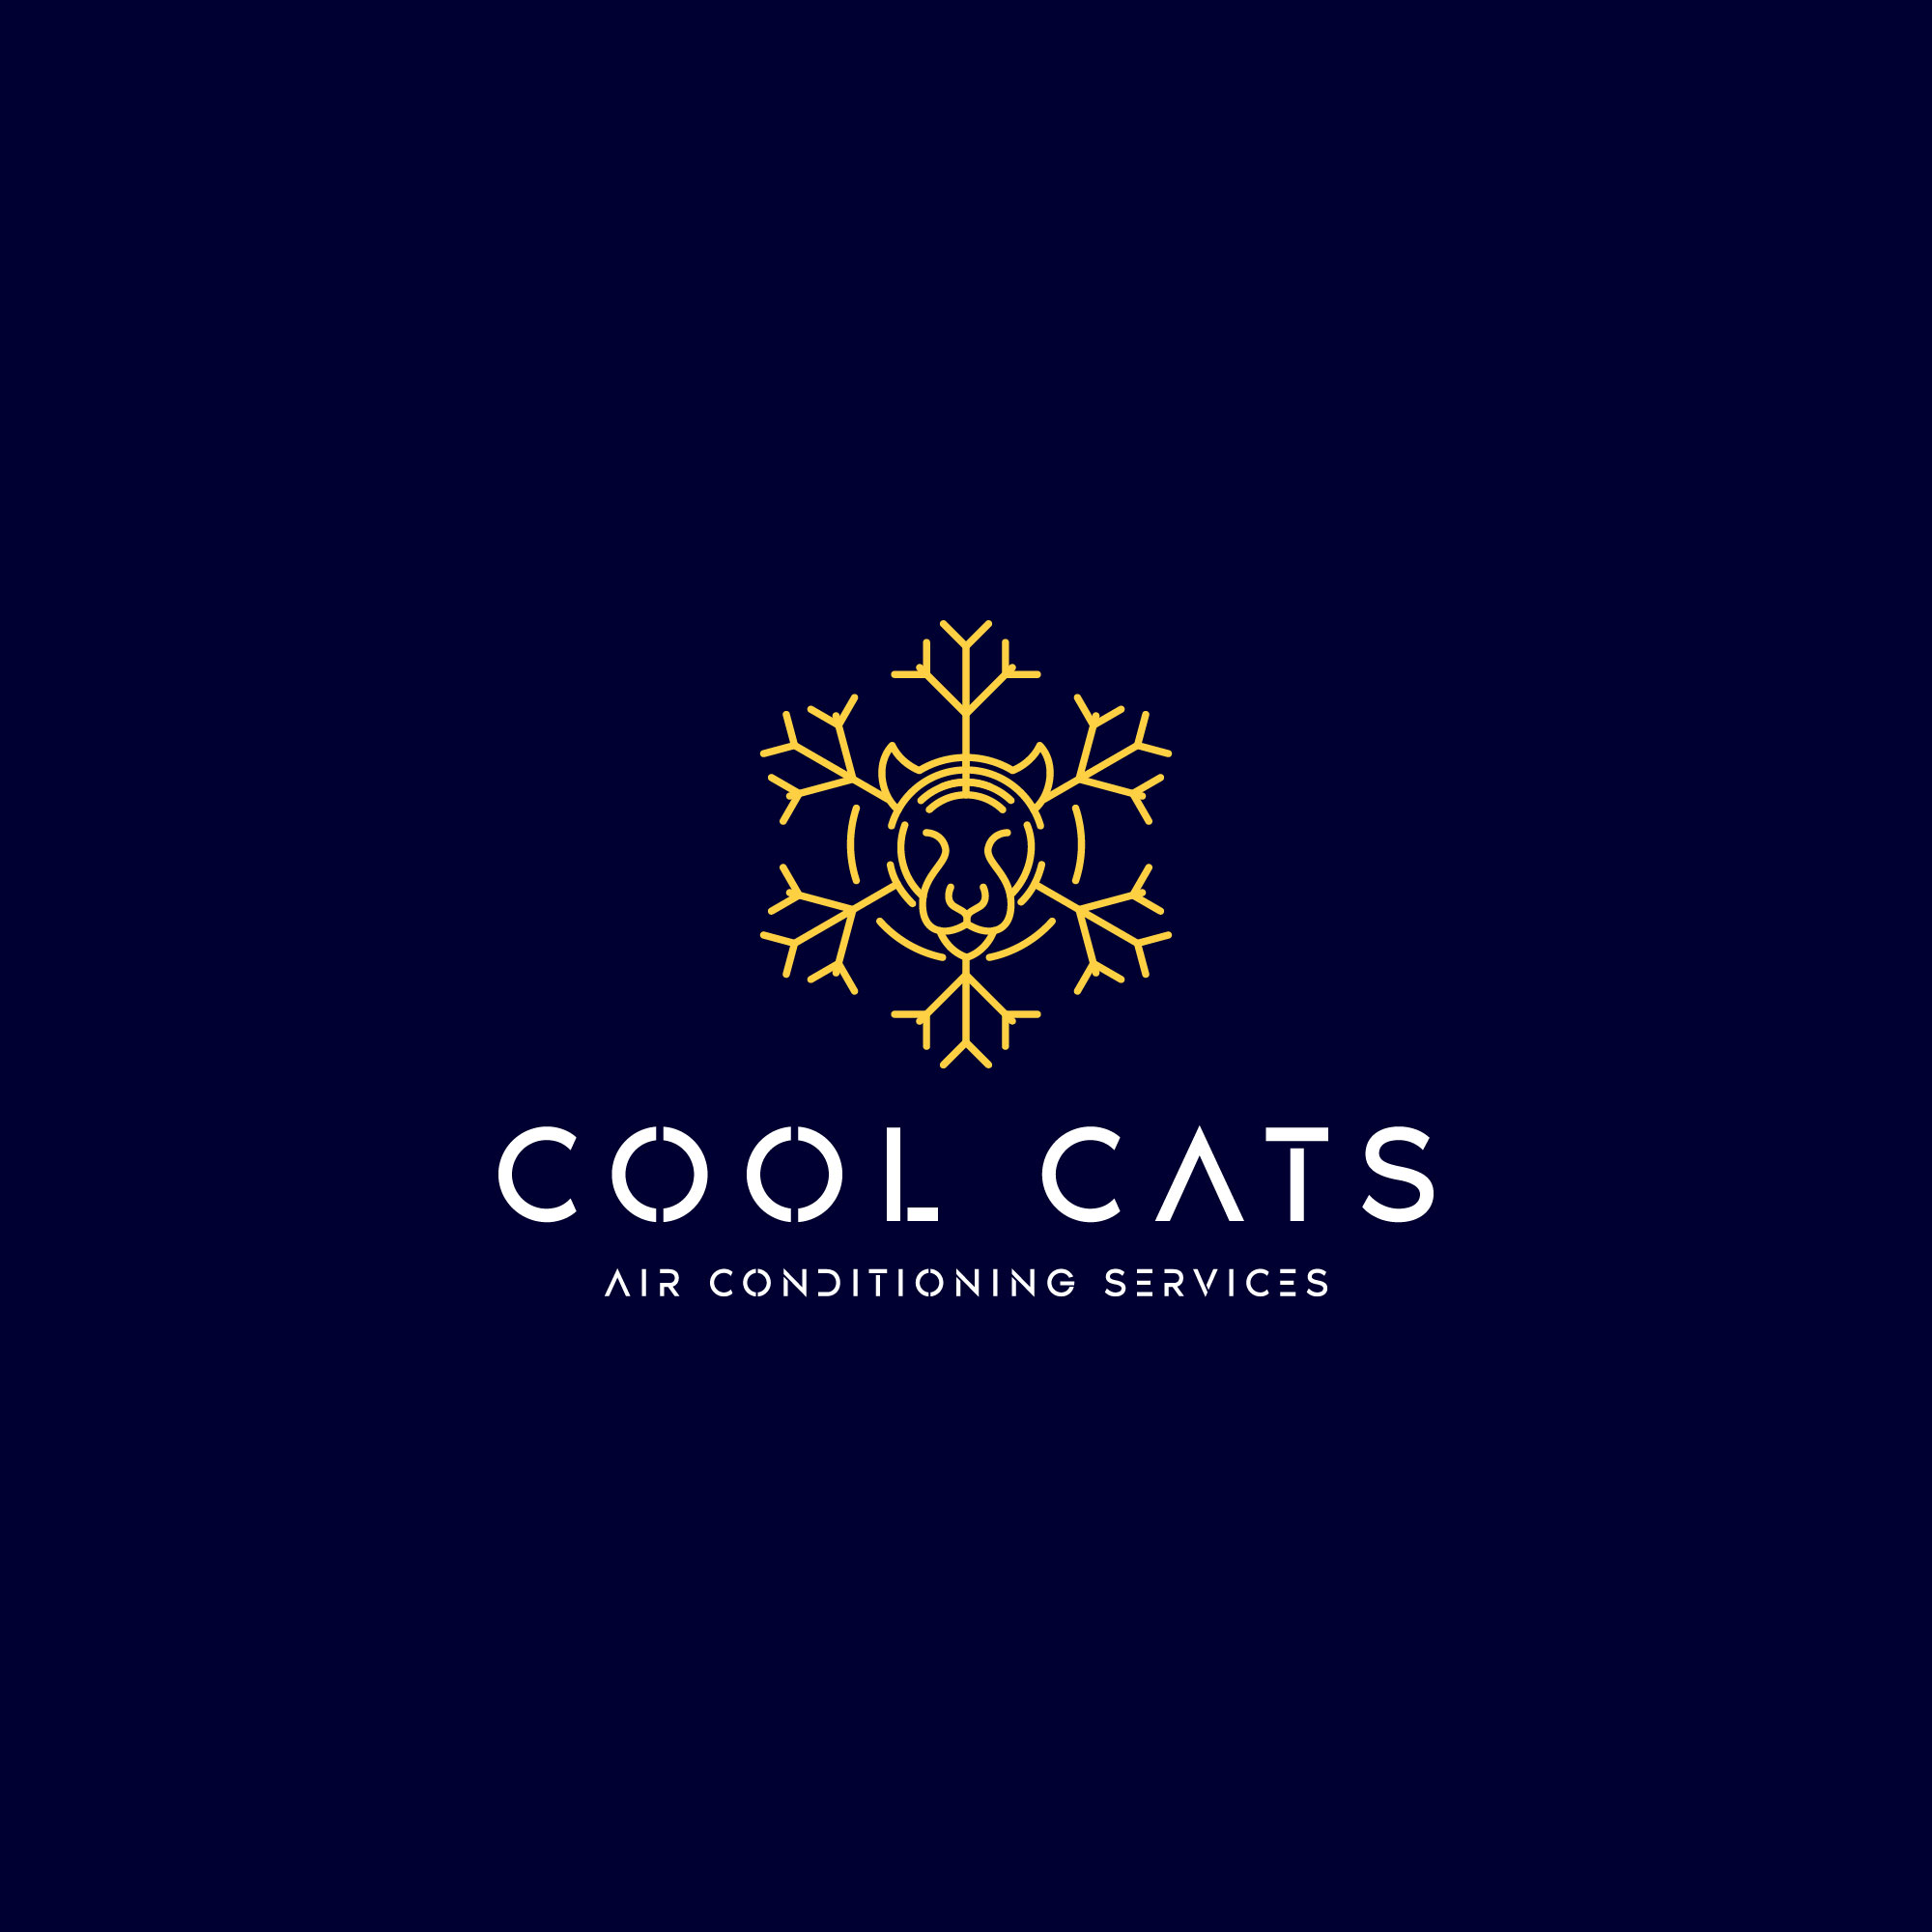 Logo of Cool Cats Air Conditioning Services Ltd